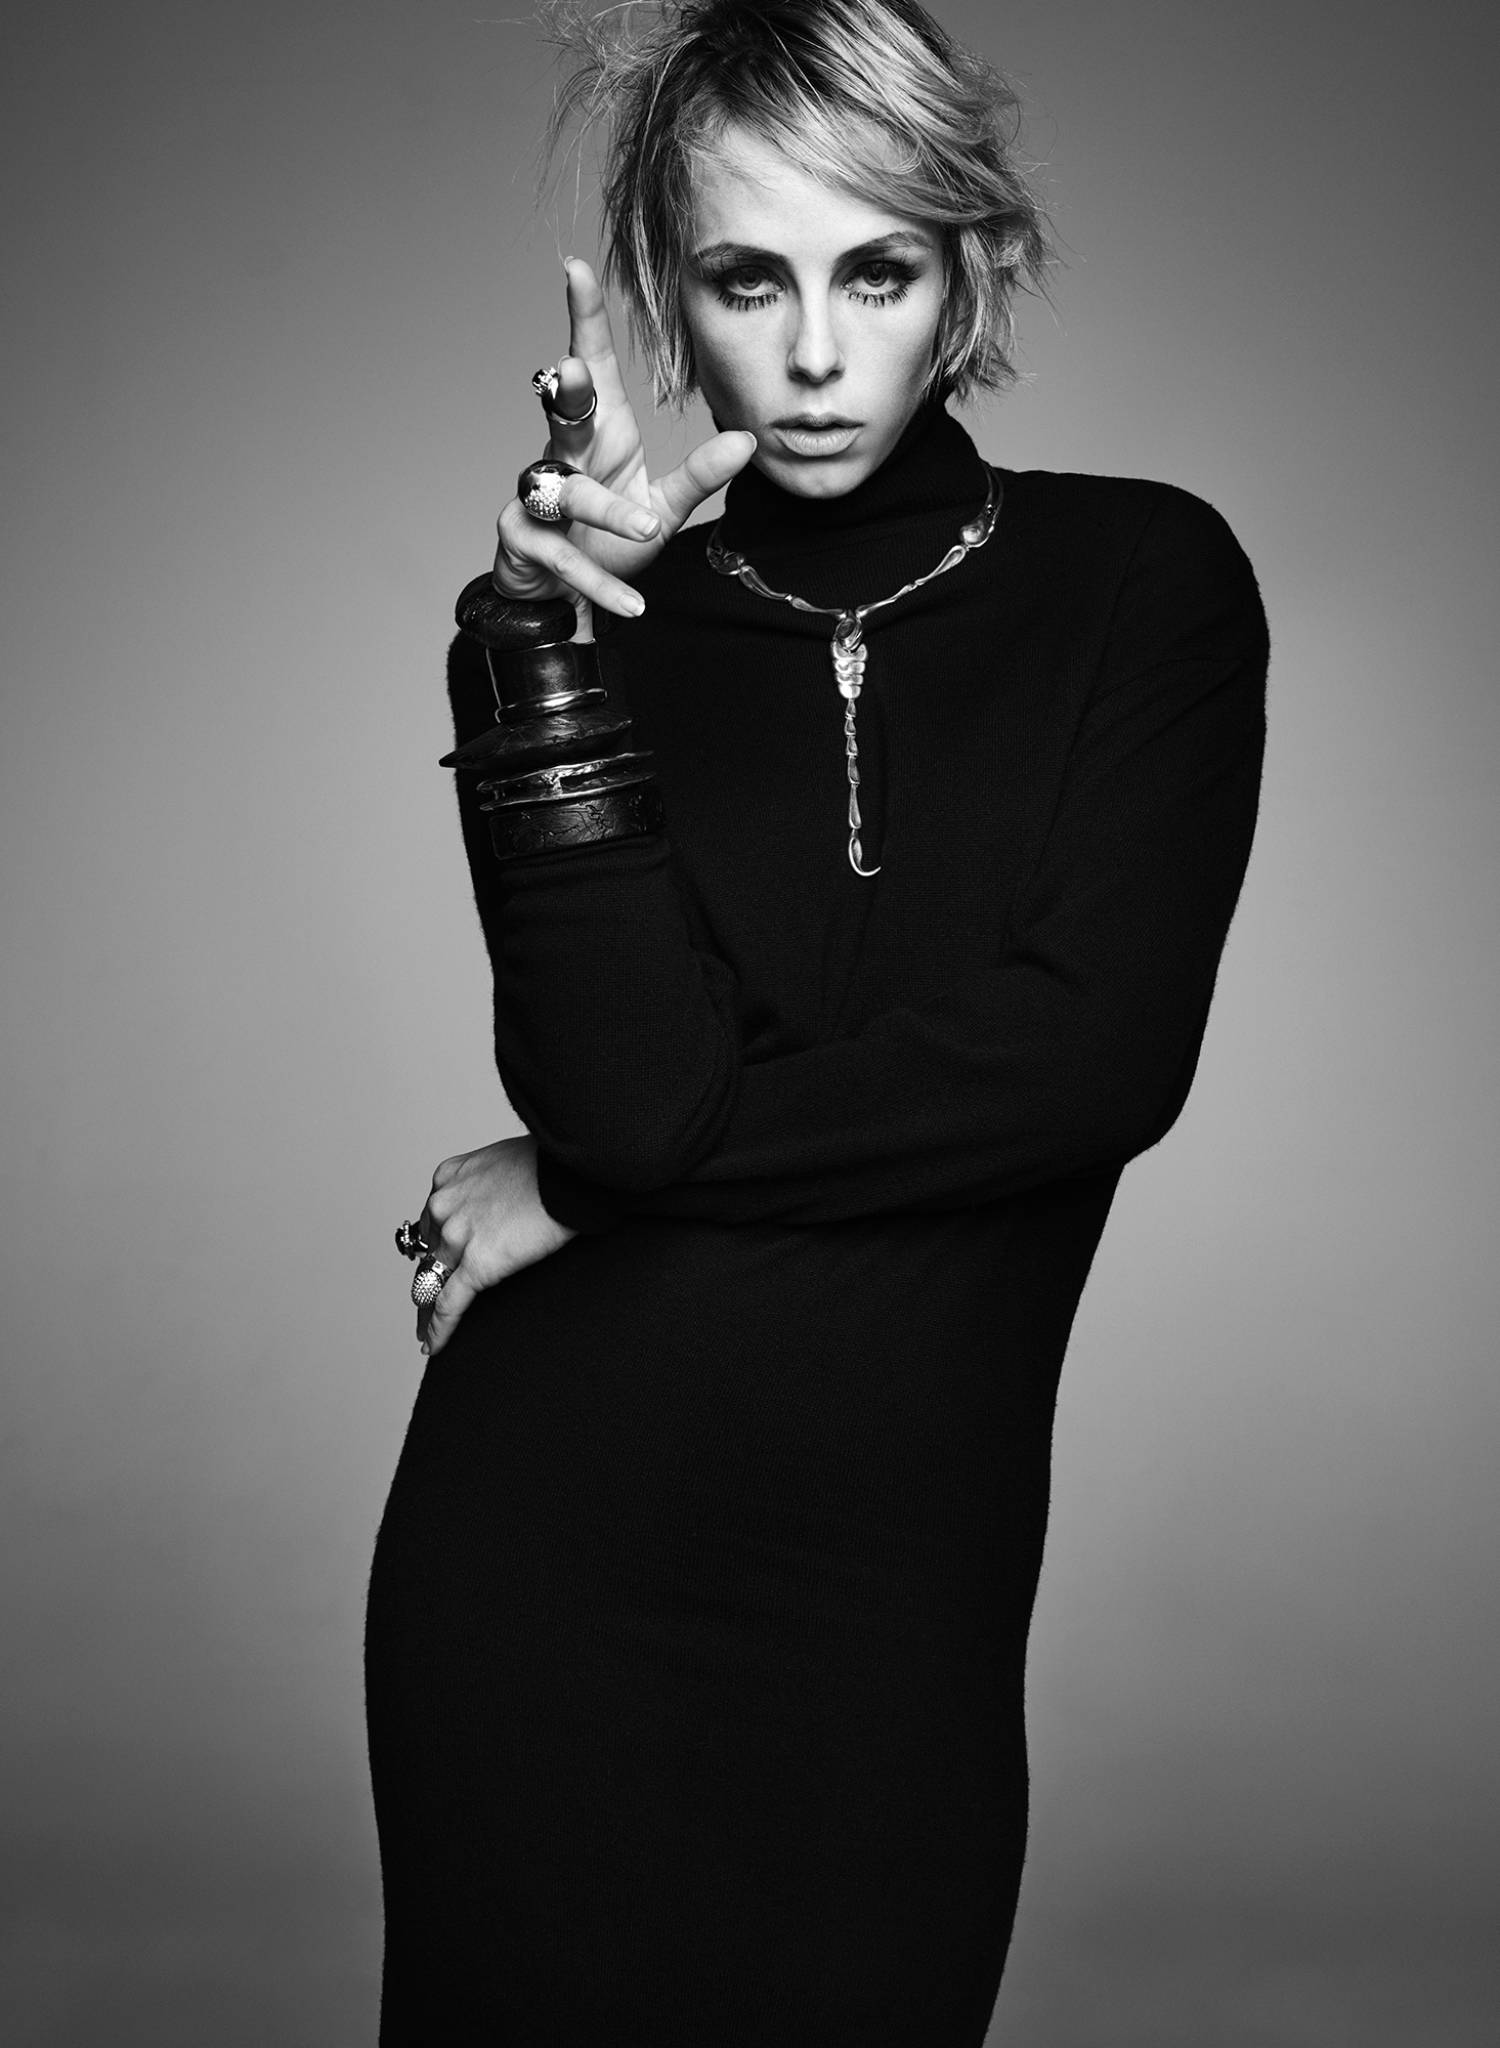 Edie Campbell in Saint Laurent by Nathaniel Goldberg for V Magazine Fall 2022